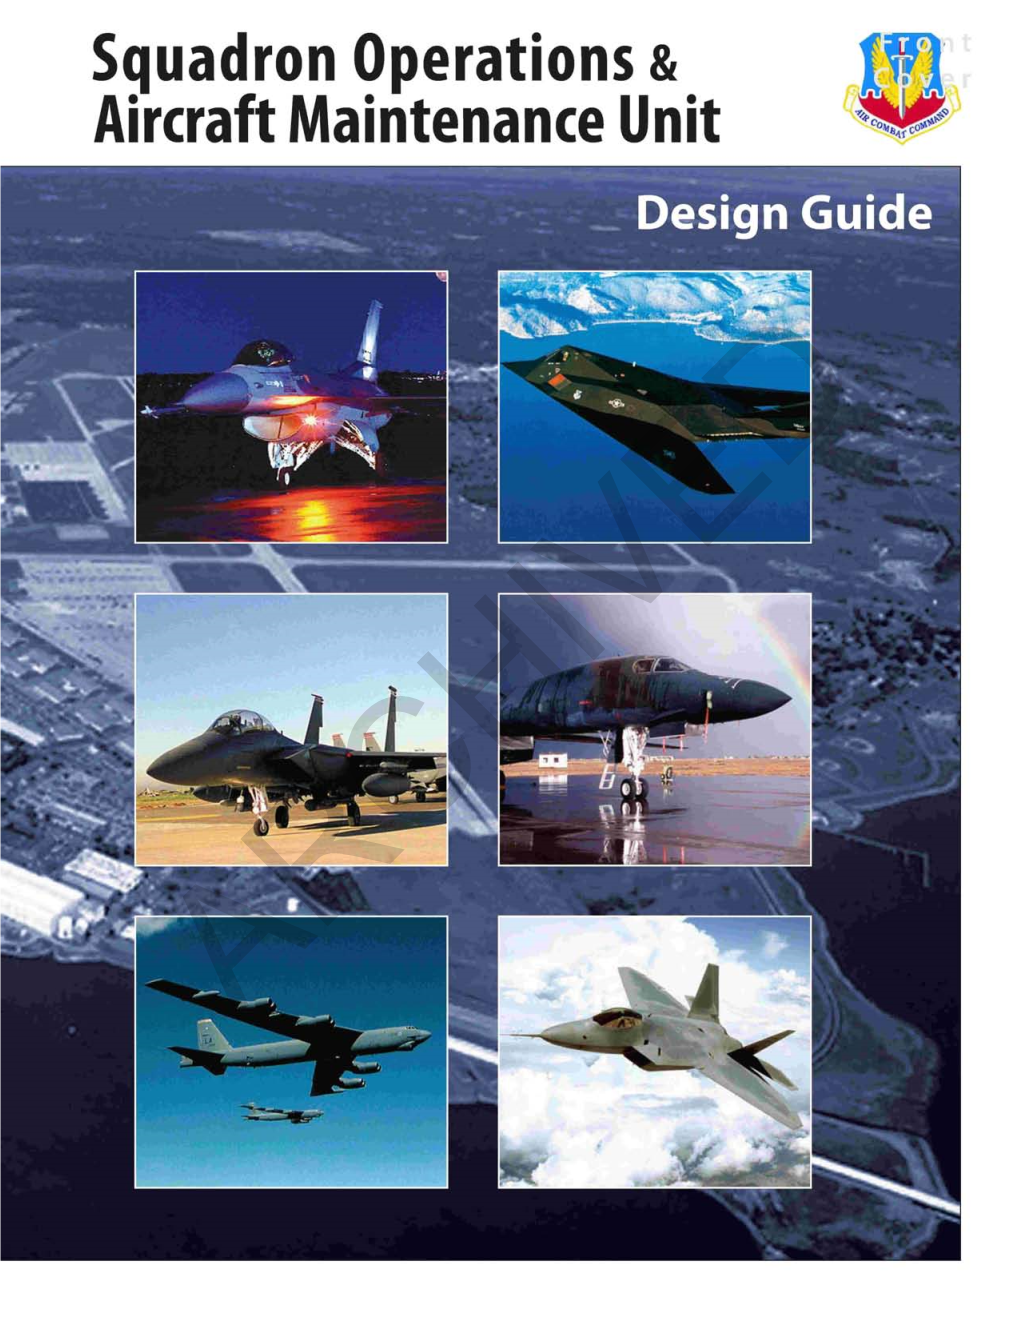 Squadron Operations and Aircraft Maintenance Unit Design Guide